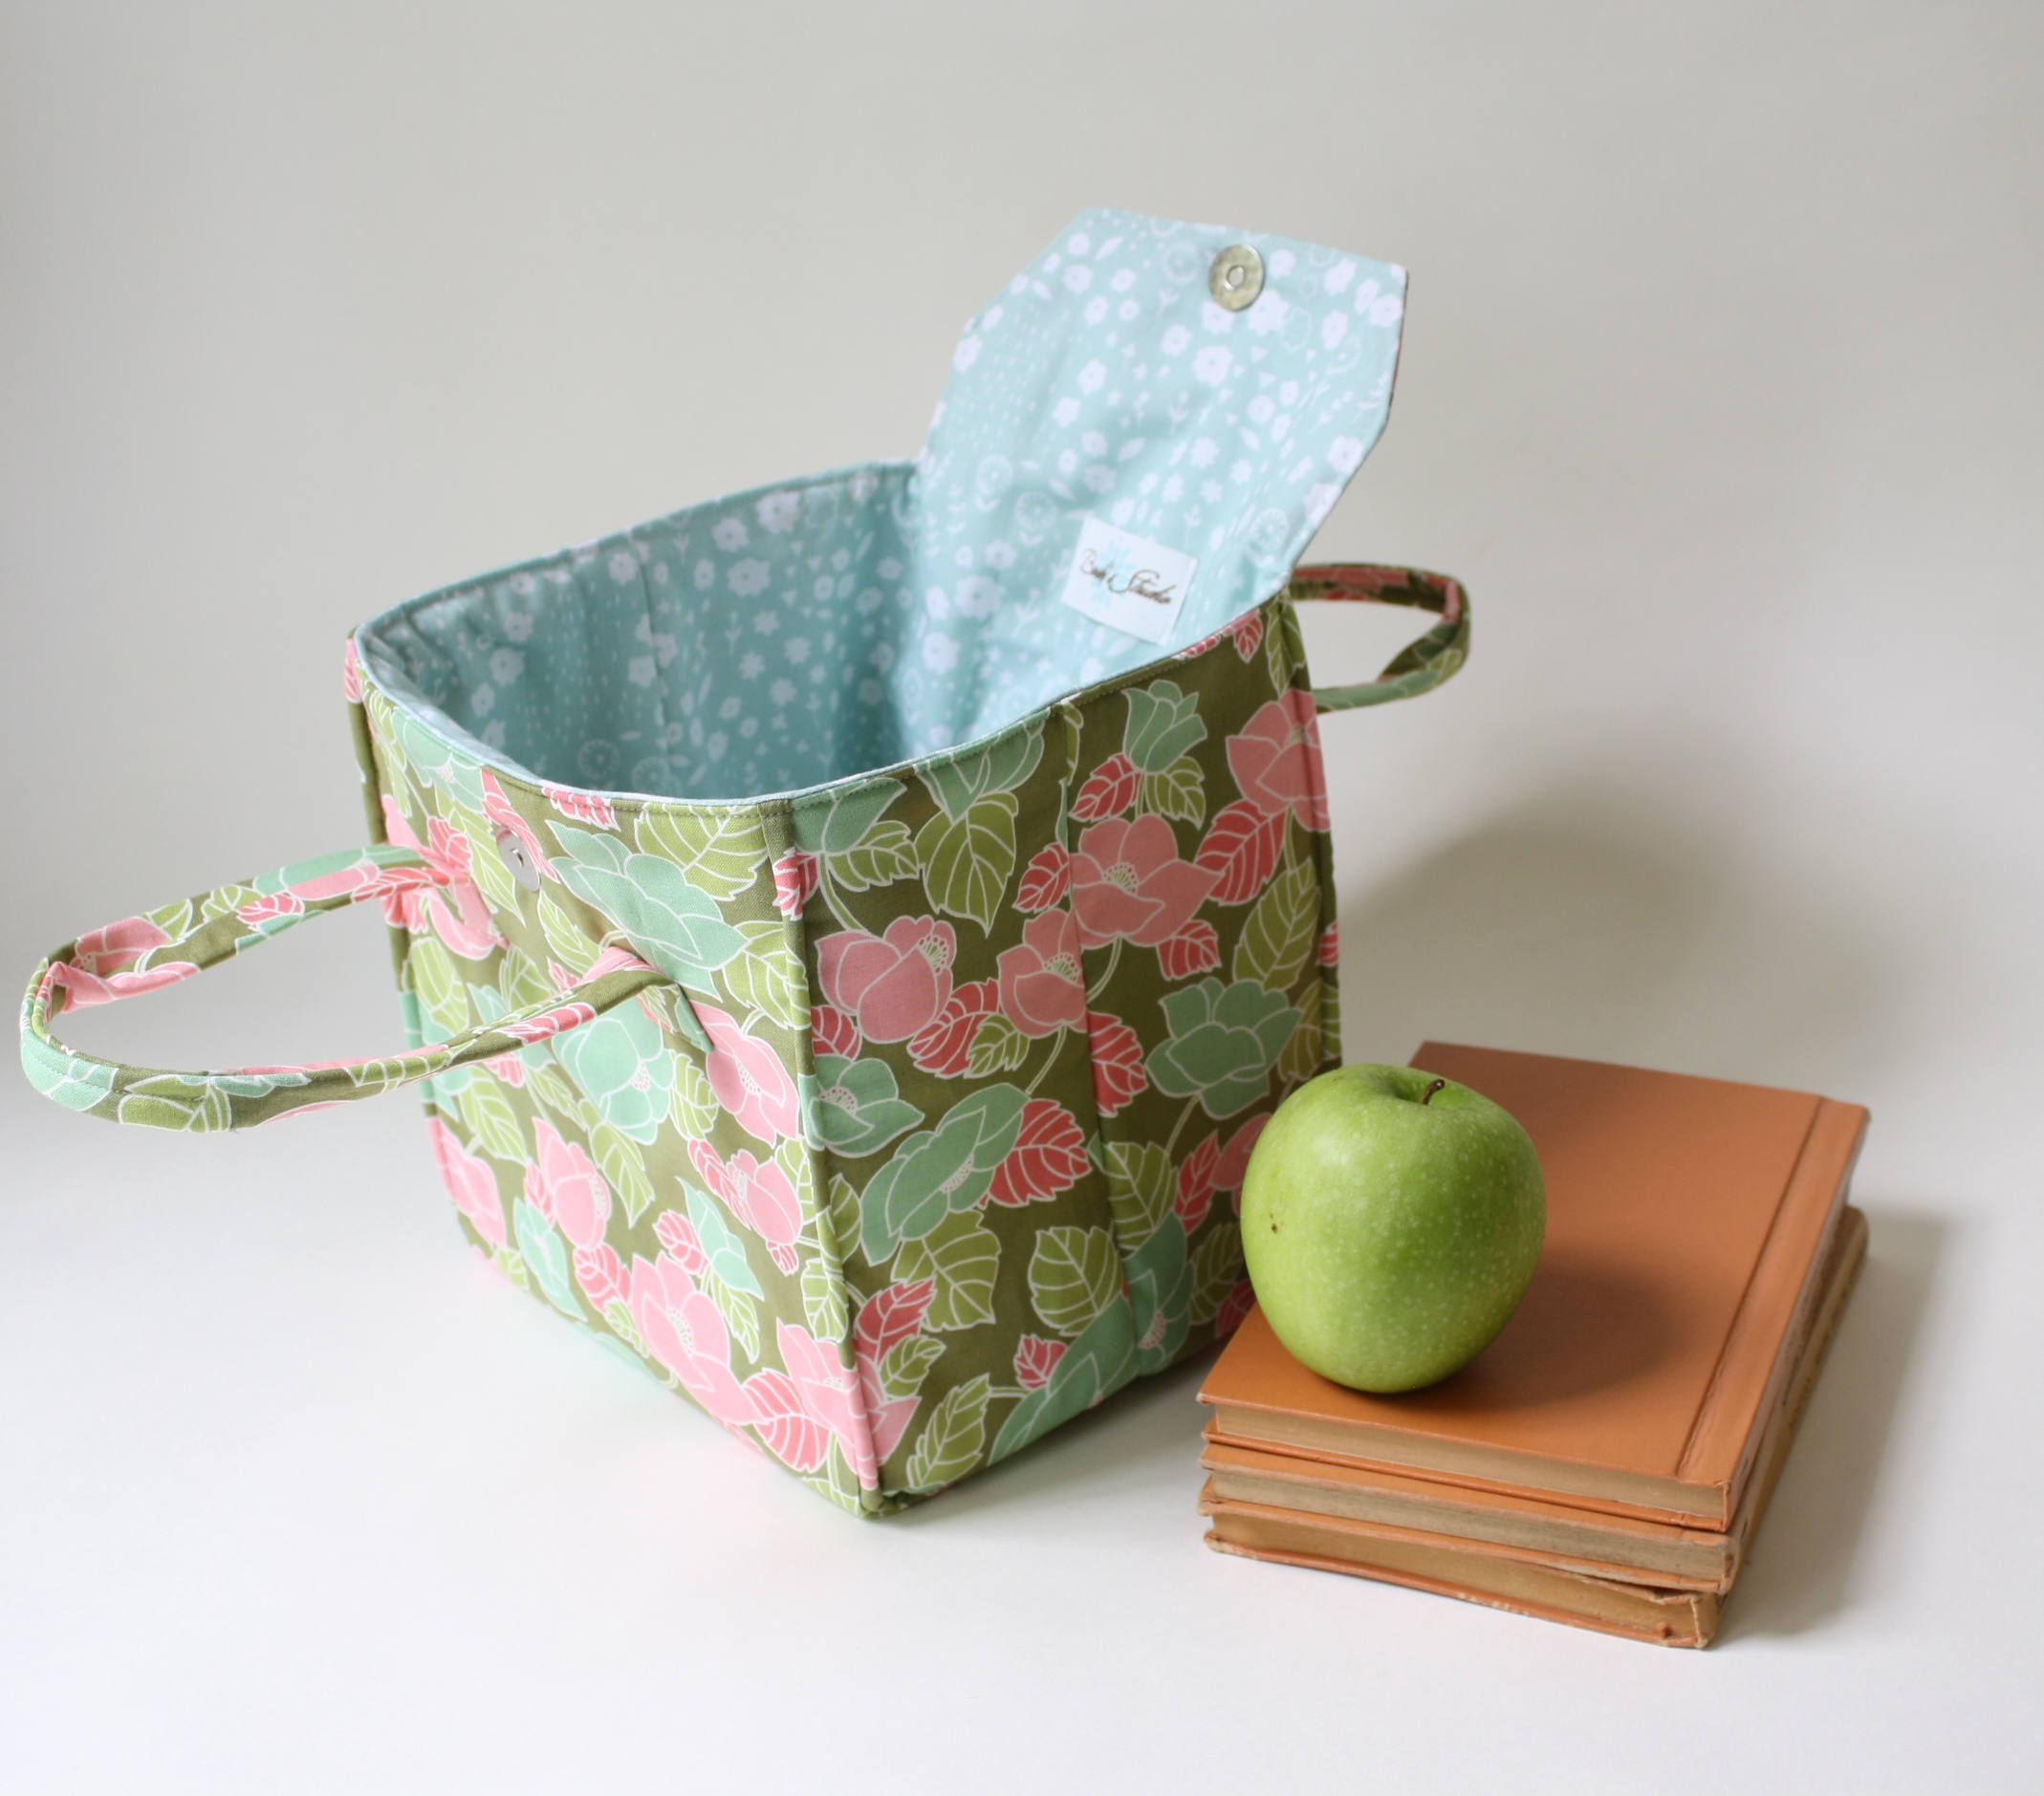 Insulated Lunch Bag in Summer Floral - Insulated Lunch Tote - Bento Box Carrier - Ready to Ship